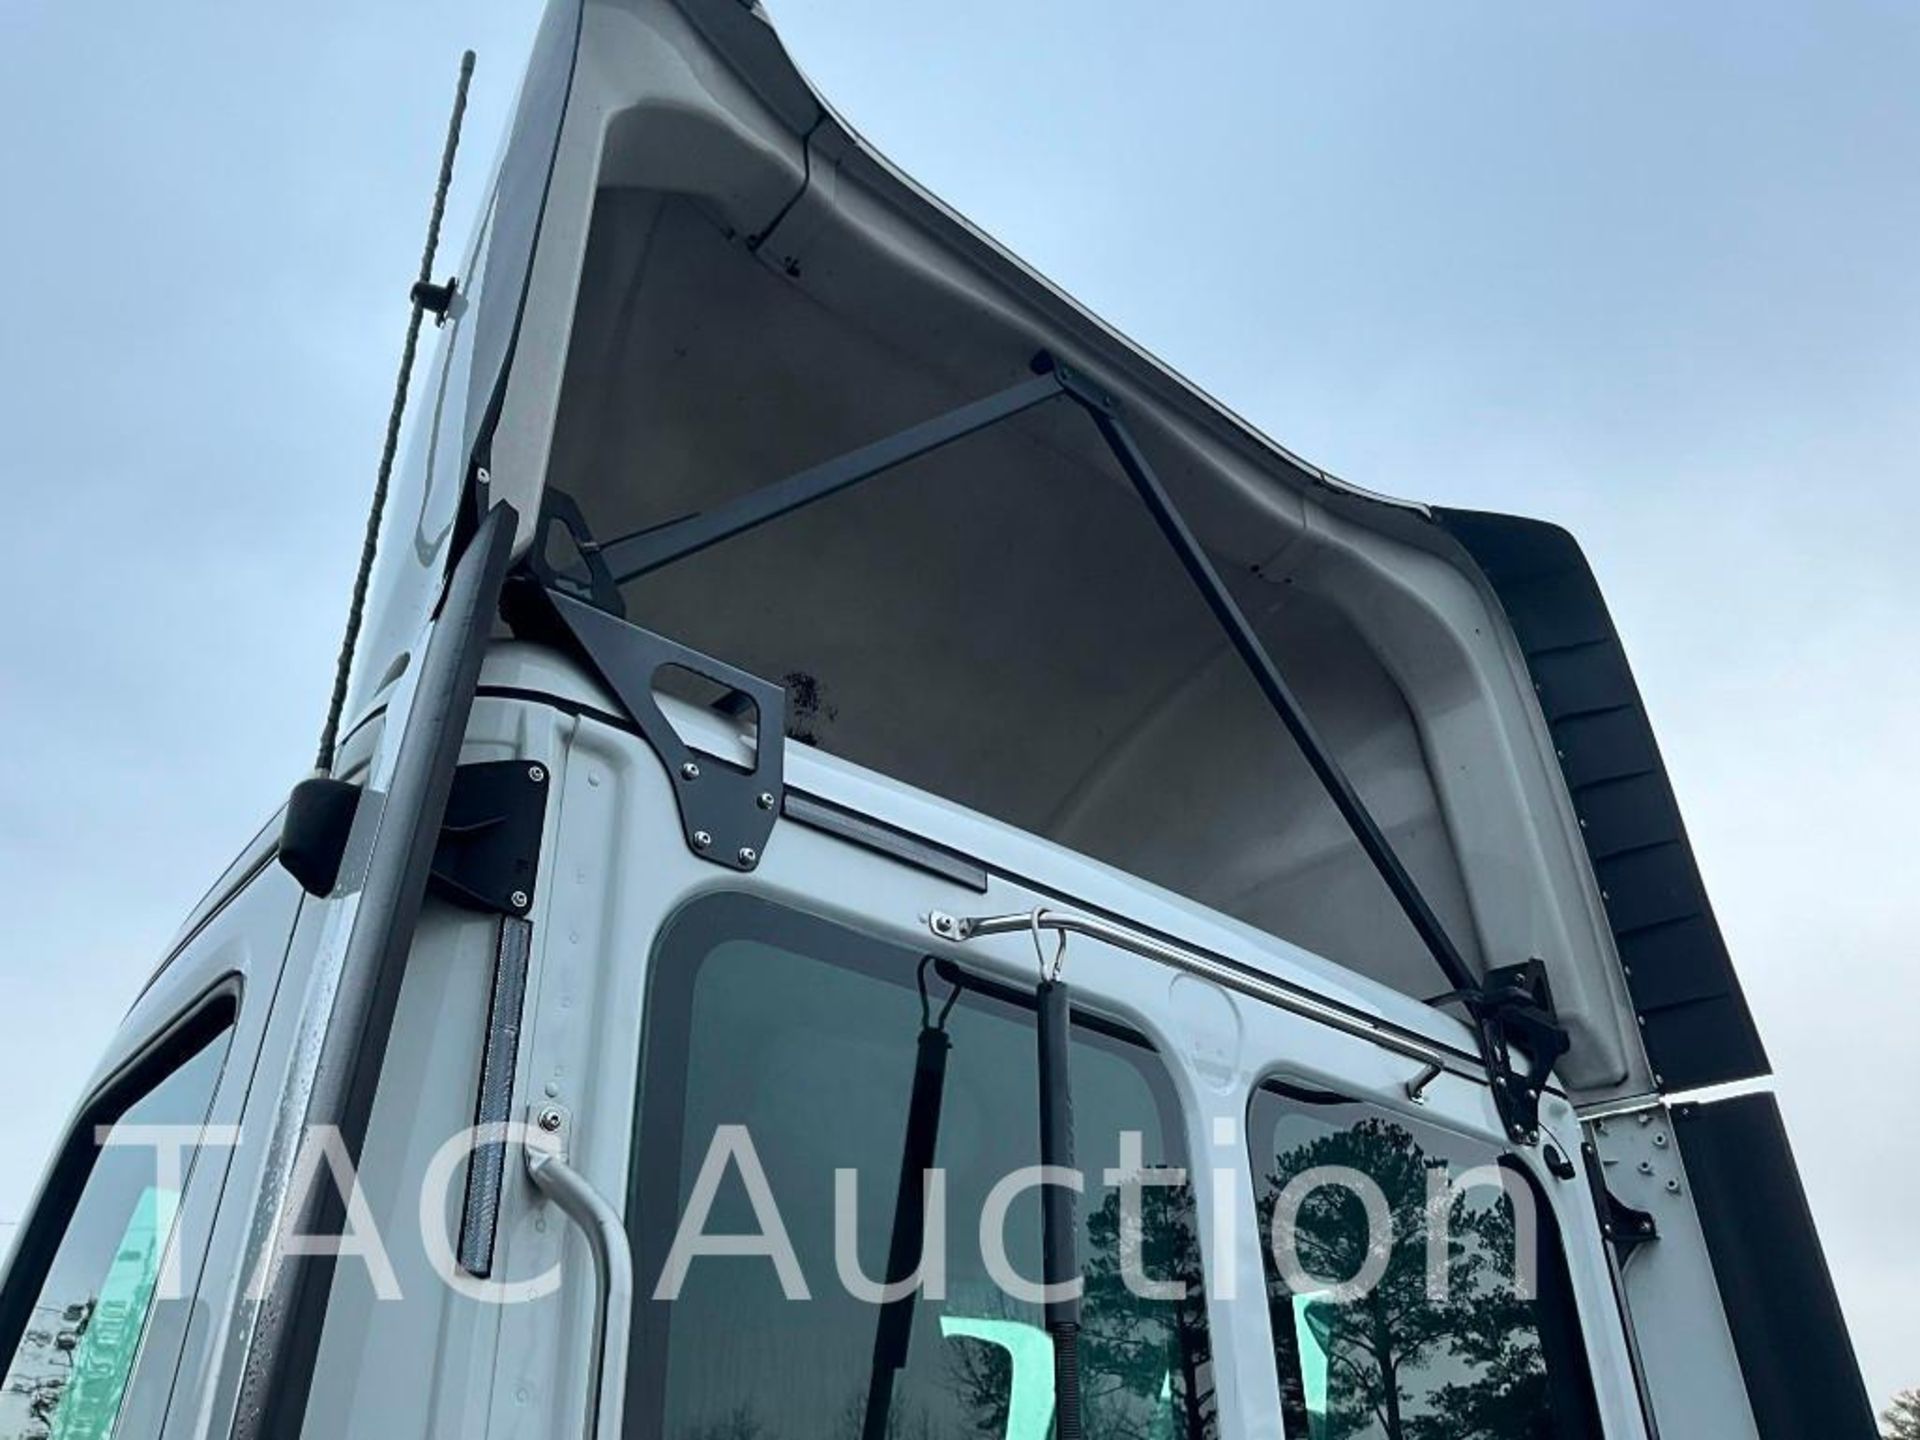 2019 Freightliner Cascadia Day Cab - Image 24 of 54